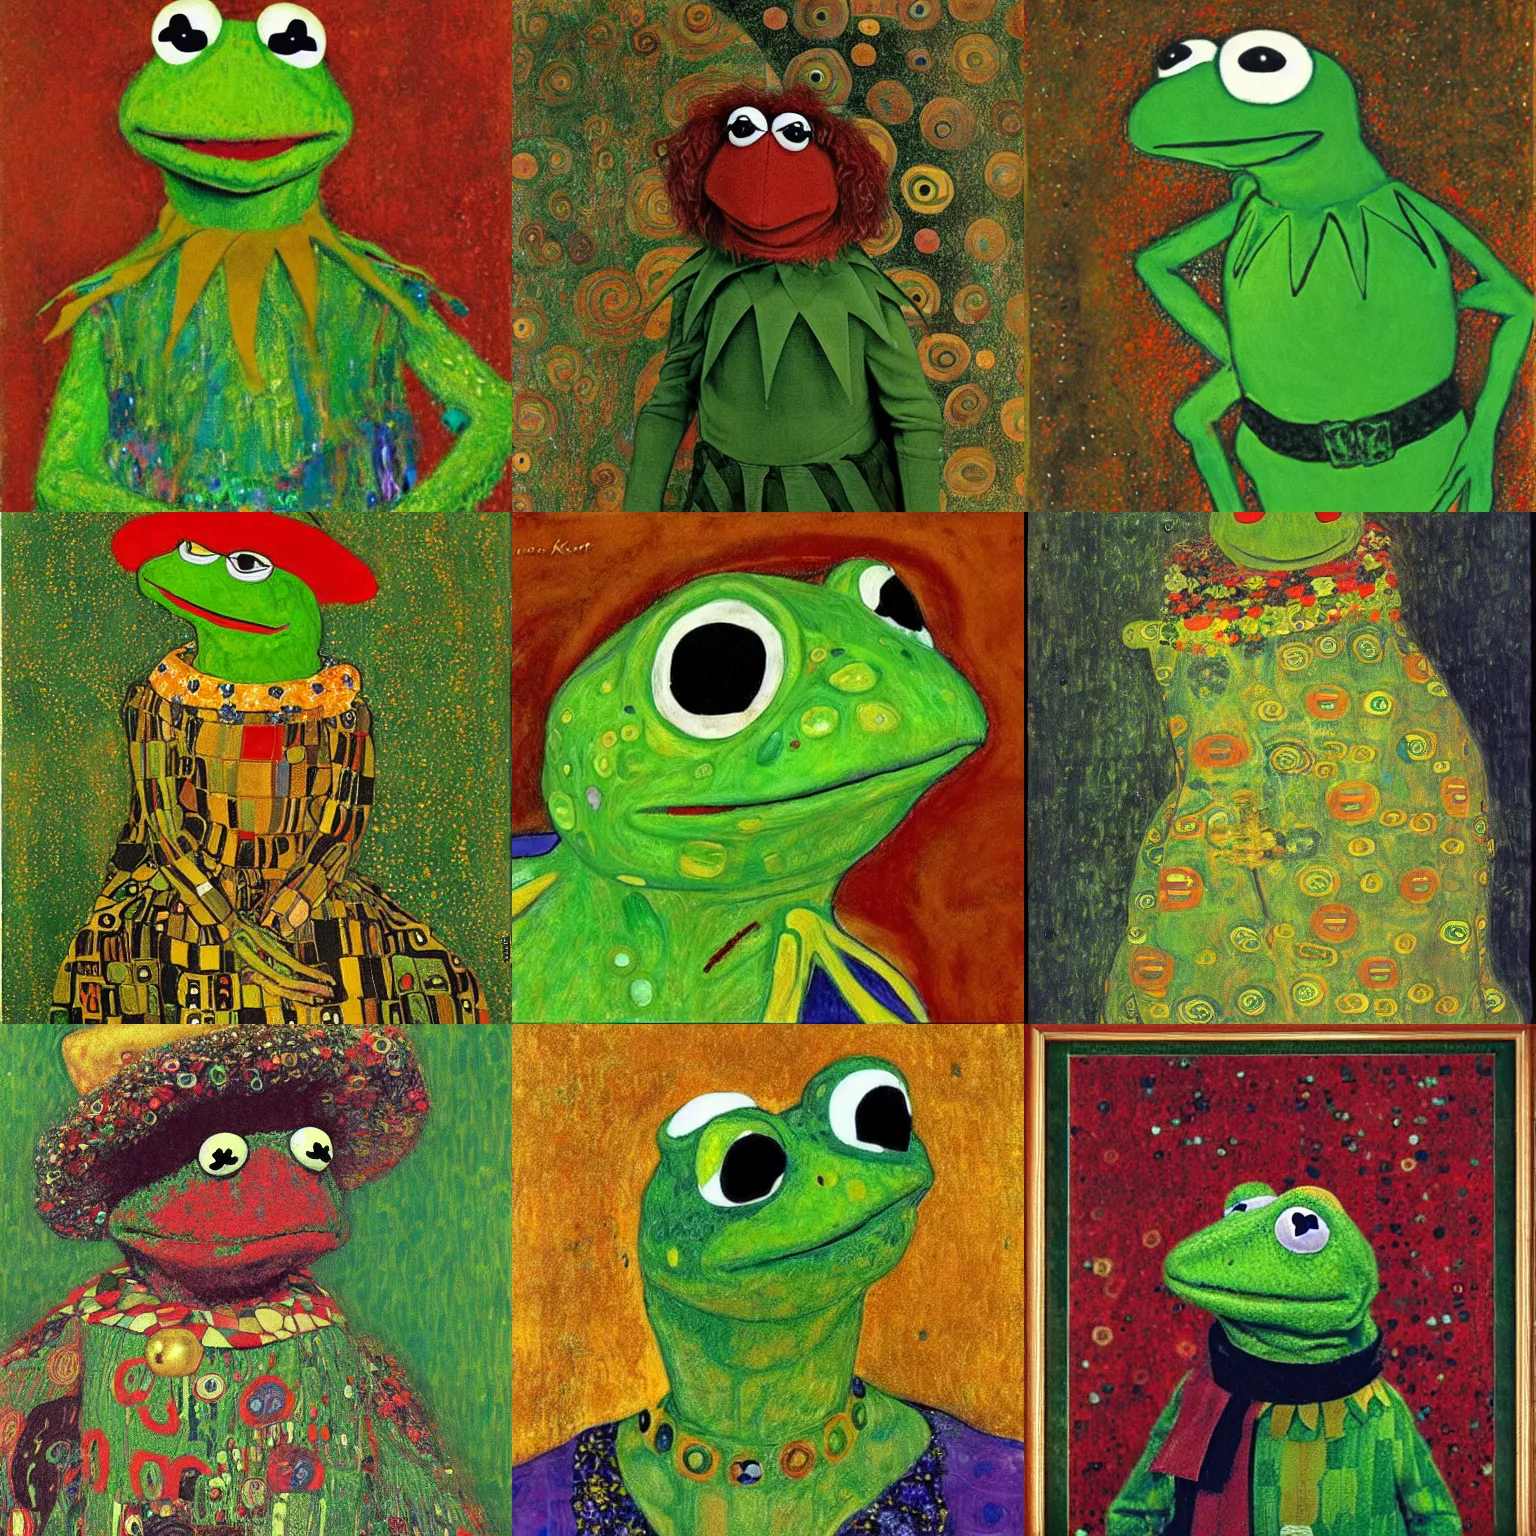 Prompt: a portrait of kermit the frog painted by gustav klimt